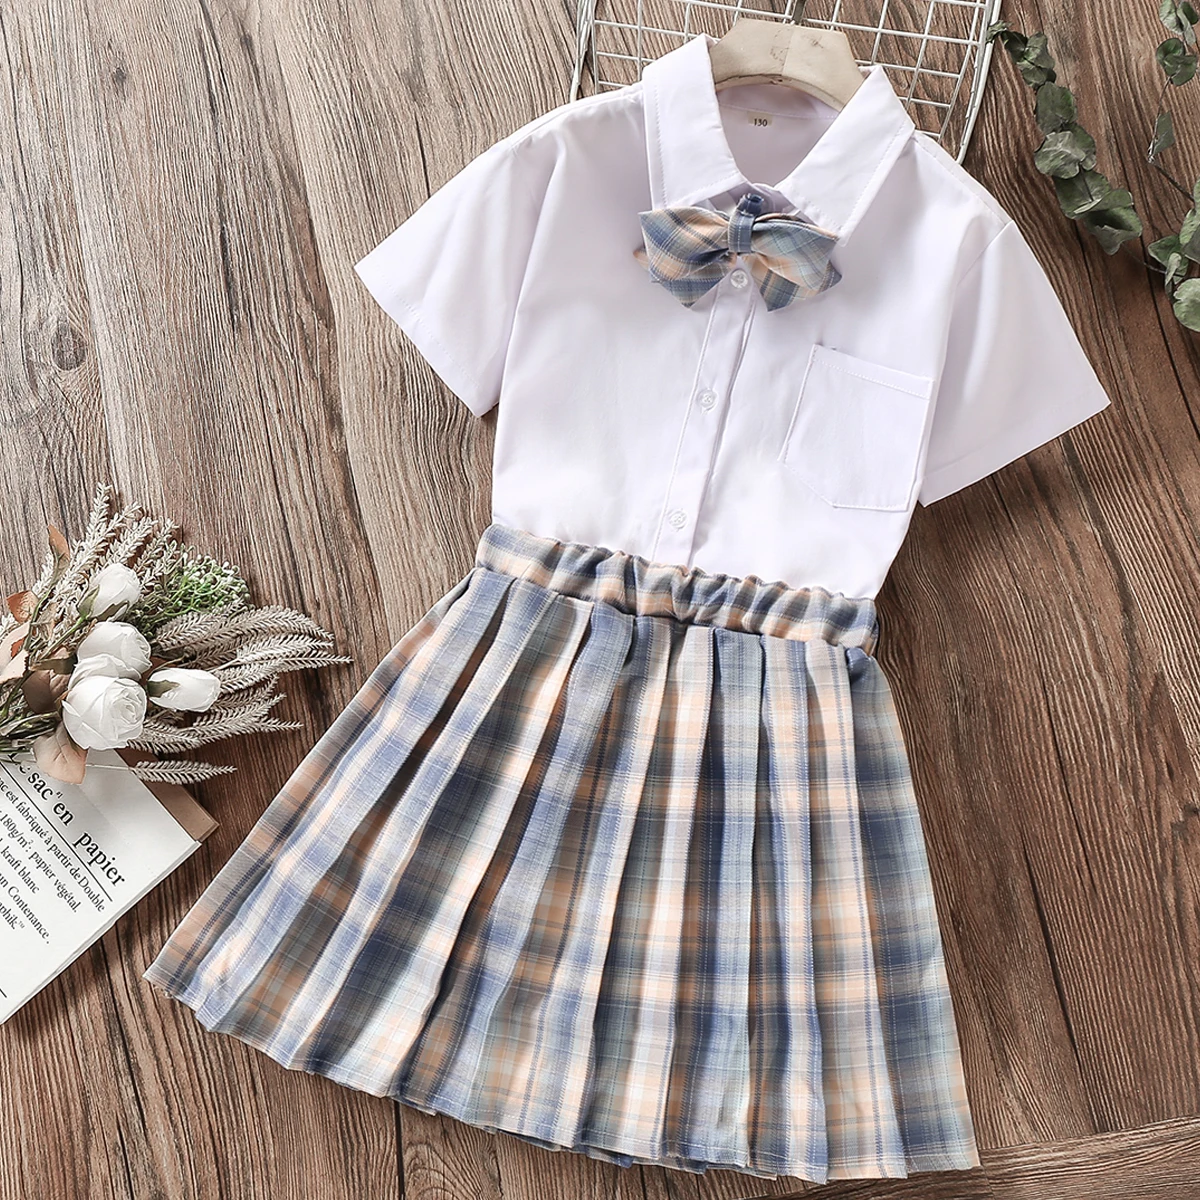 

School Uniform Kids Suits for Girls Sets Shirt & Skirt Set 2pcs Cotton Clothes for Teenagers Outfits Baby Costumes 8 10 12 Years